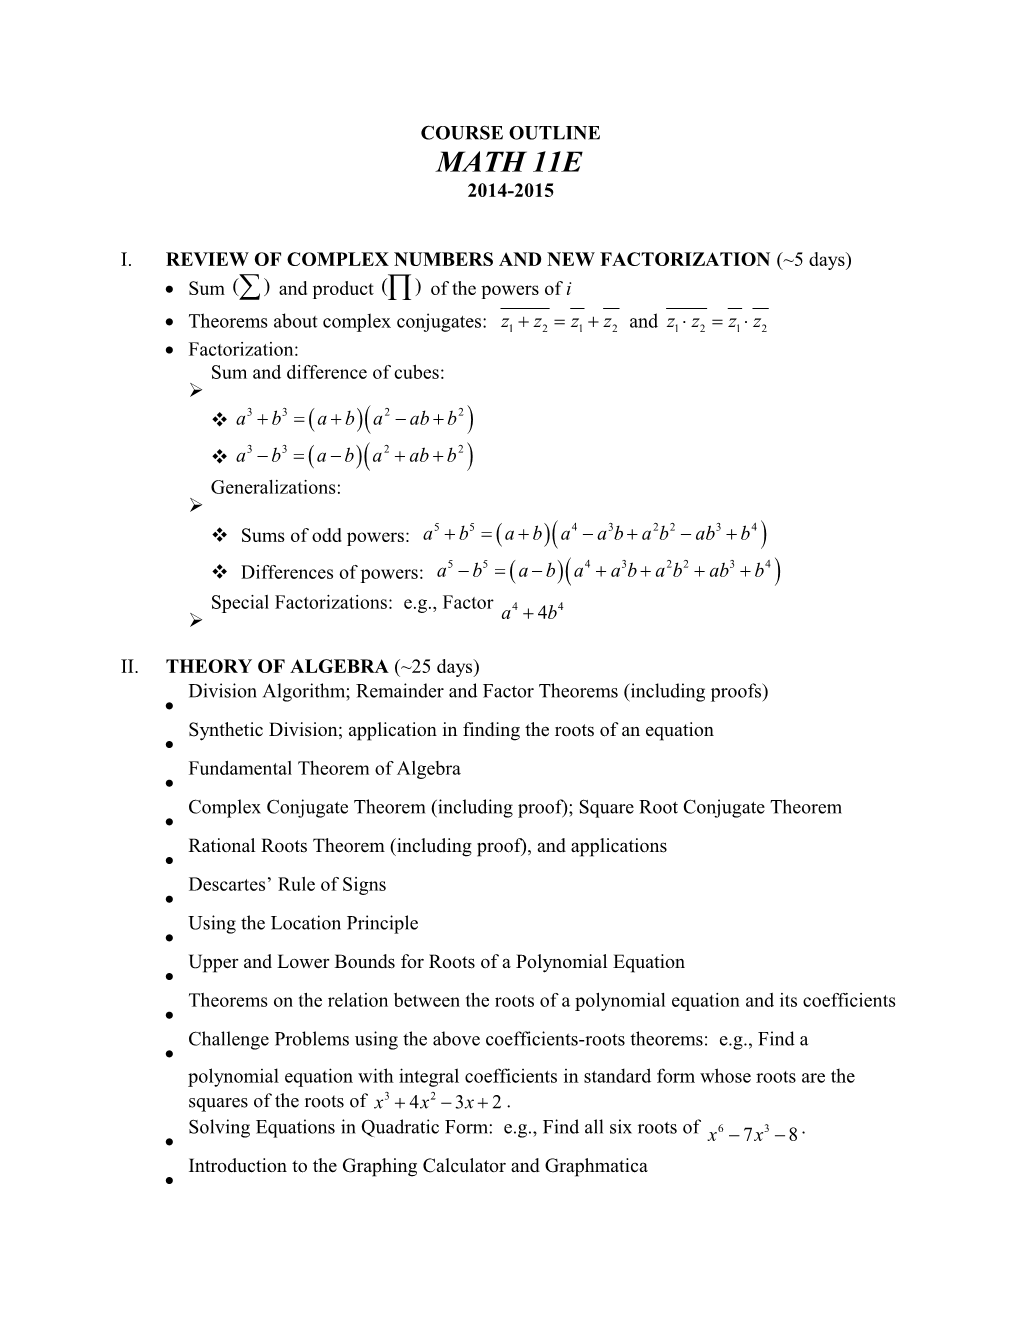 I. REVIEW of COMPLEX NUMBERS ANDNEW FACTORIZATION ( 5 Days)